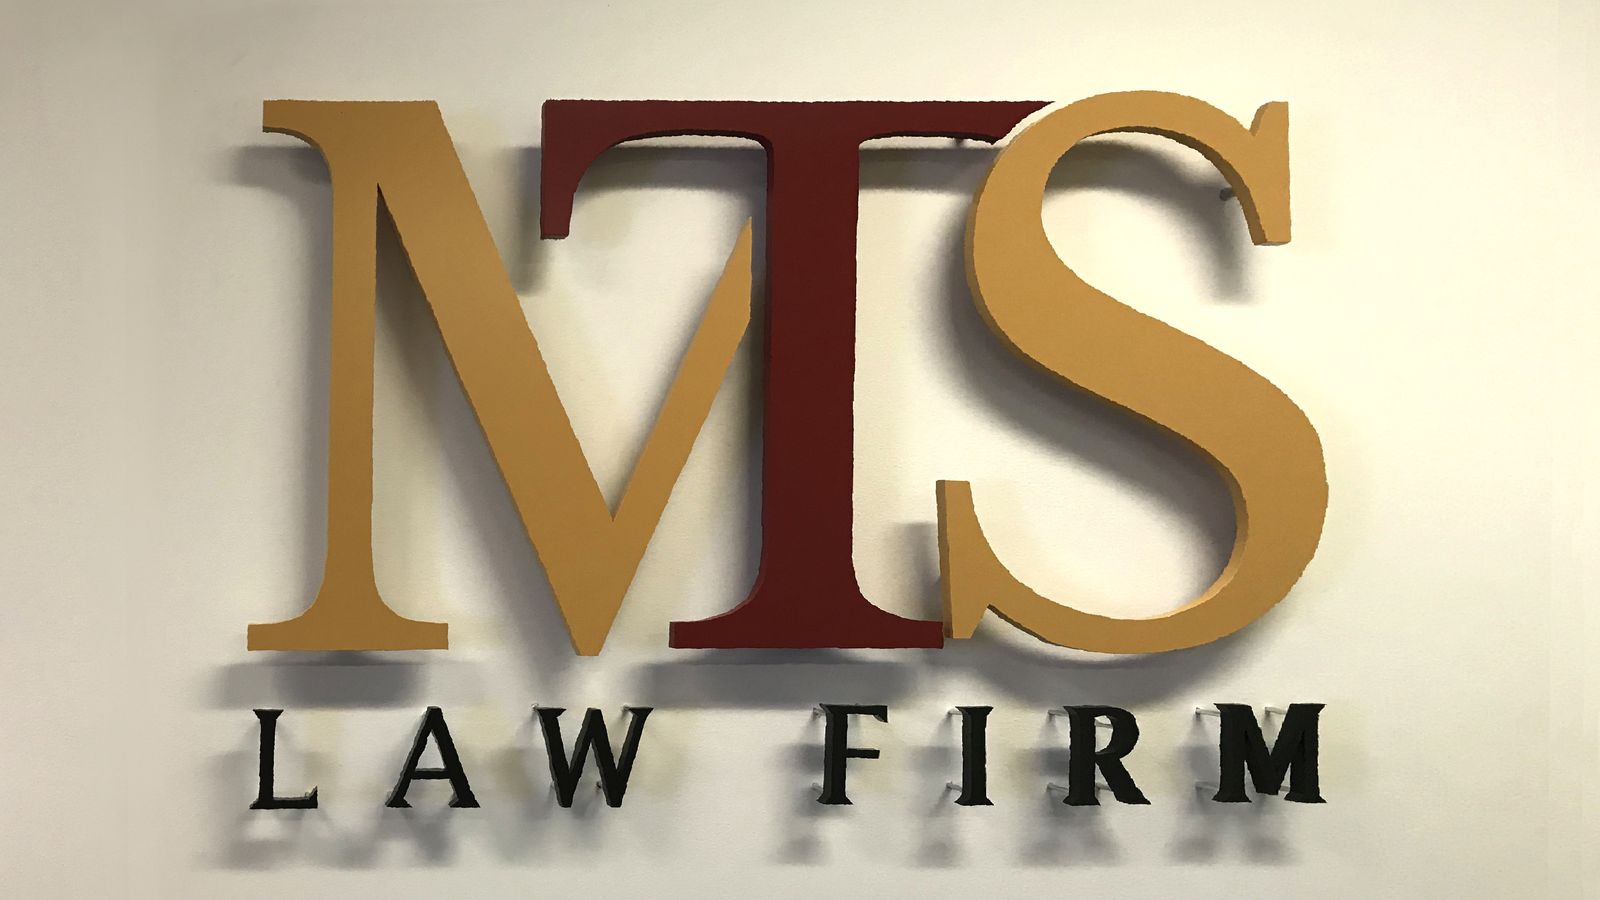 mts law firm dimensional letters